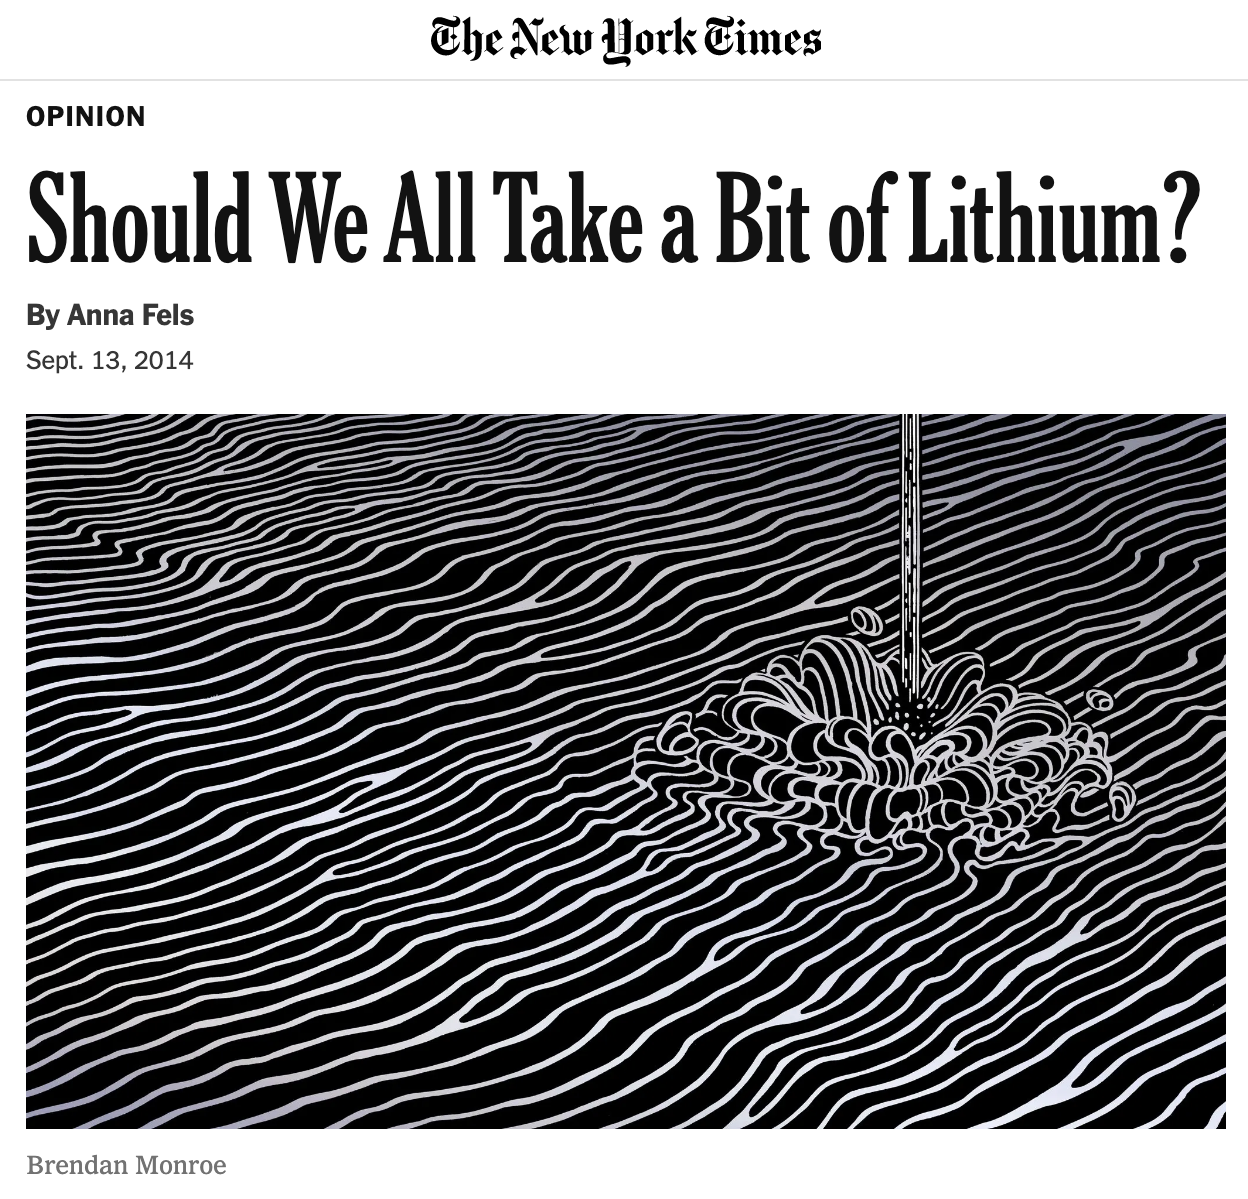 Should We All Take a Bit of Lithium?